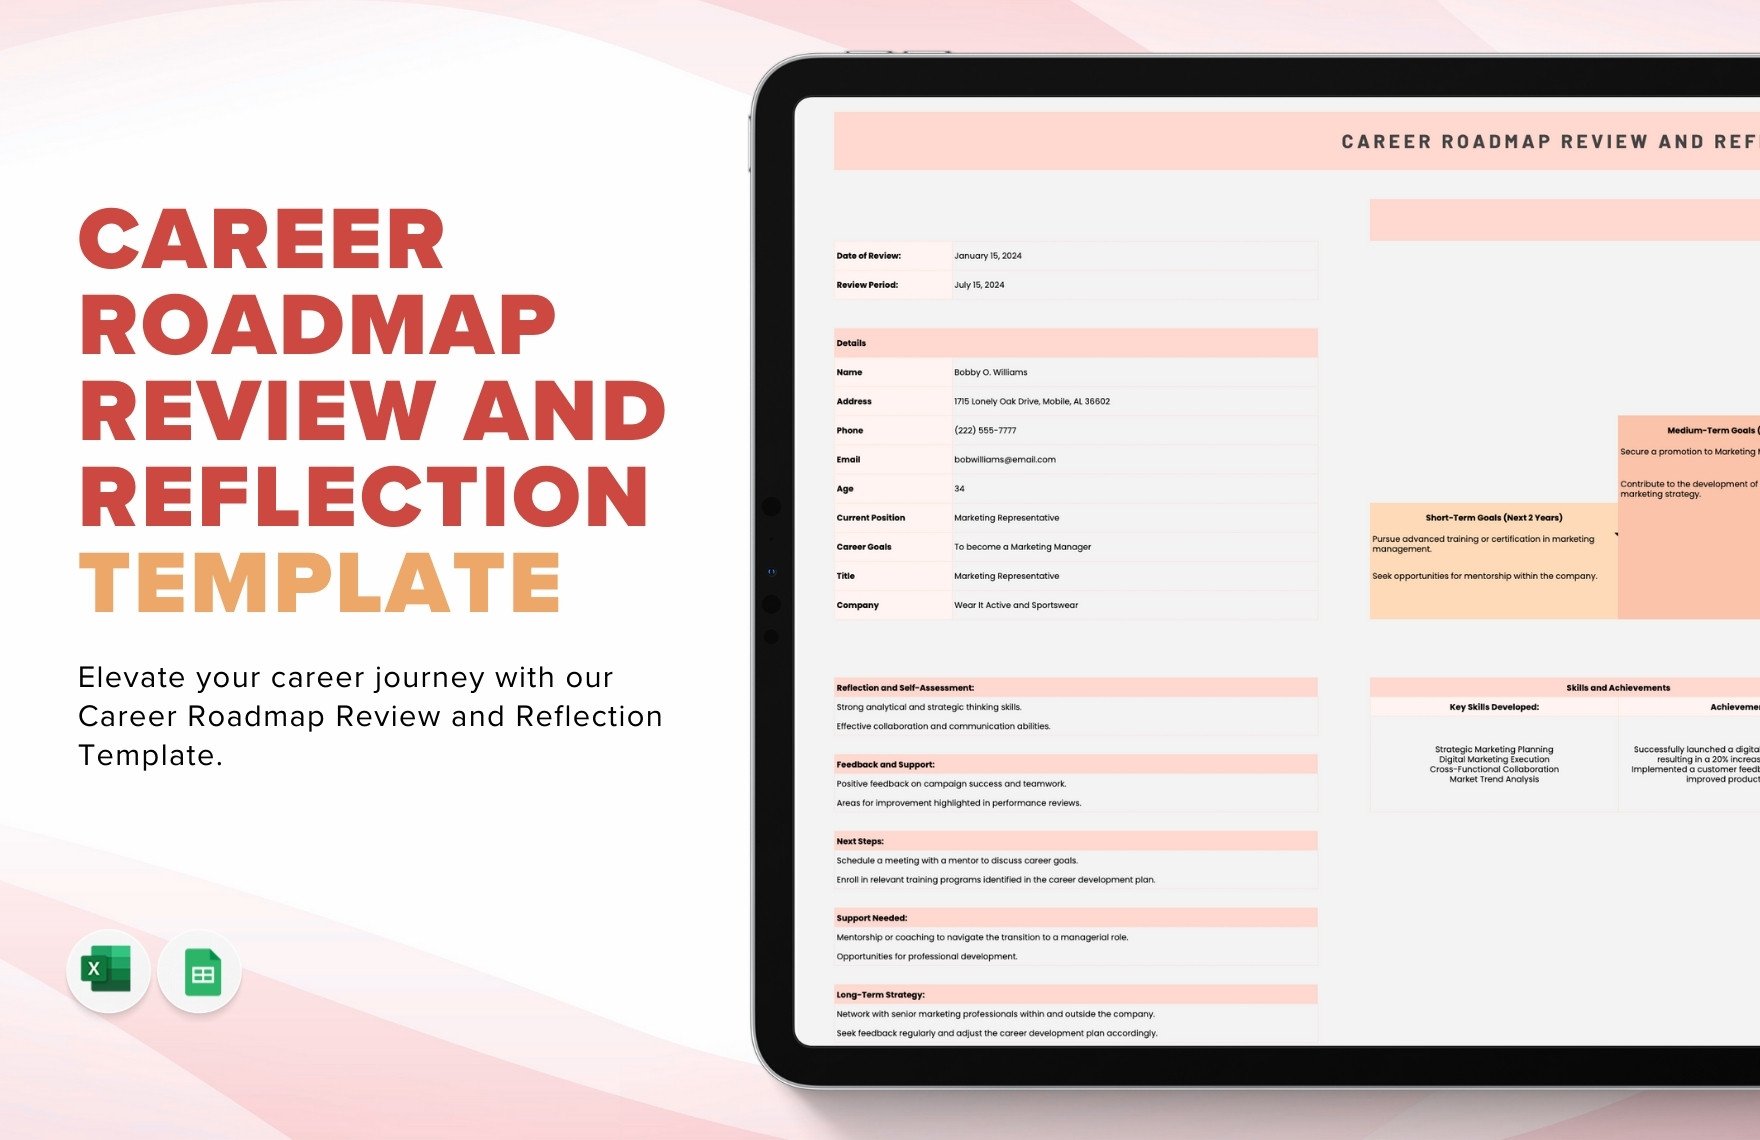 Career Roadmap Review and Reflection Template